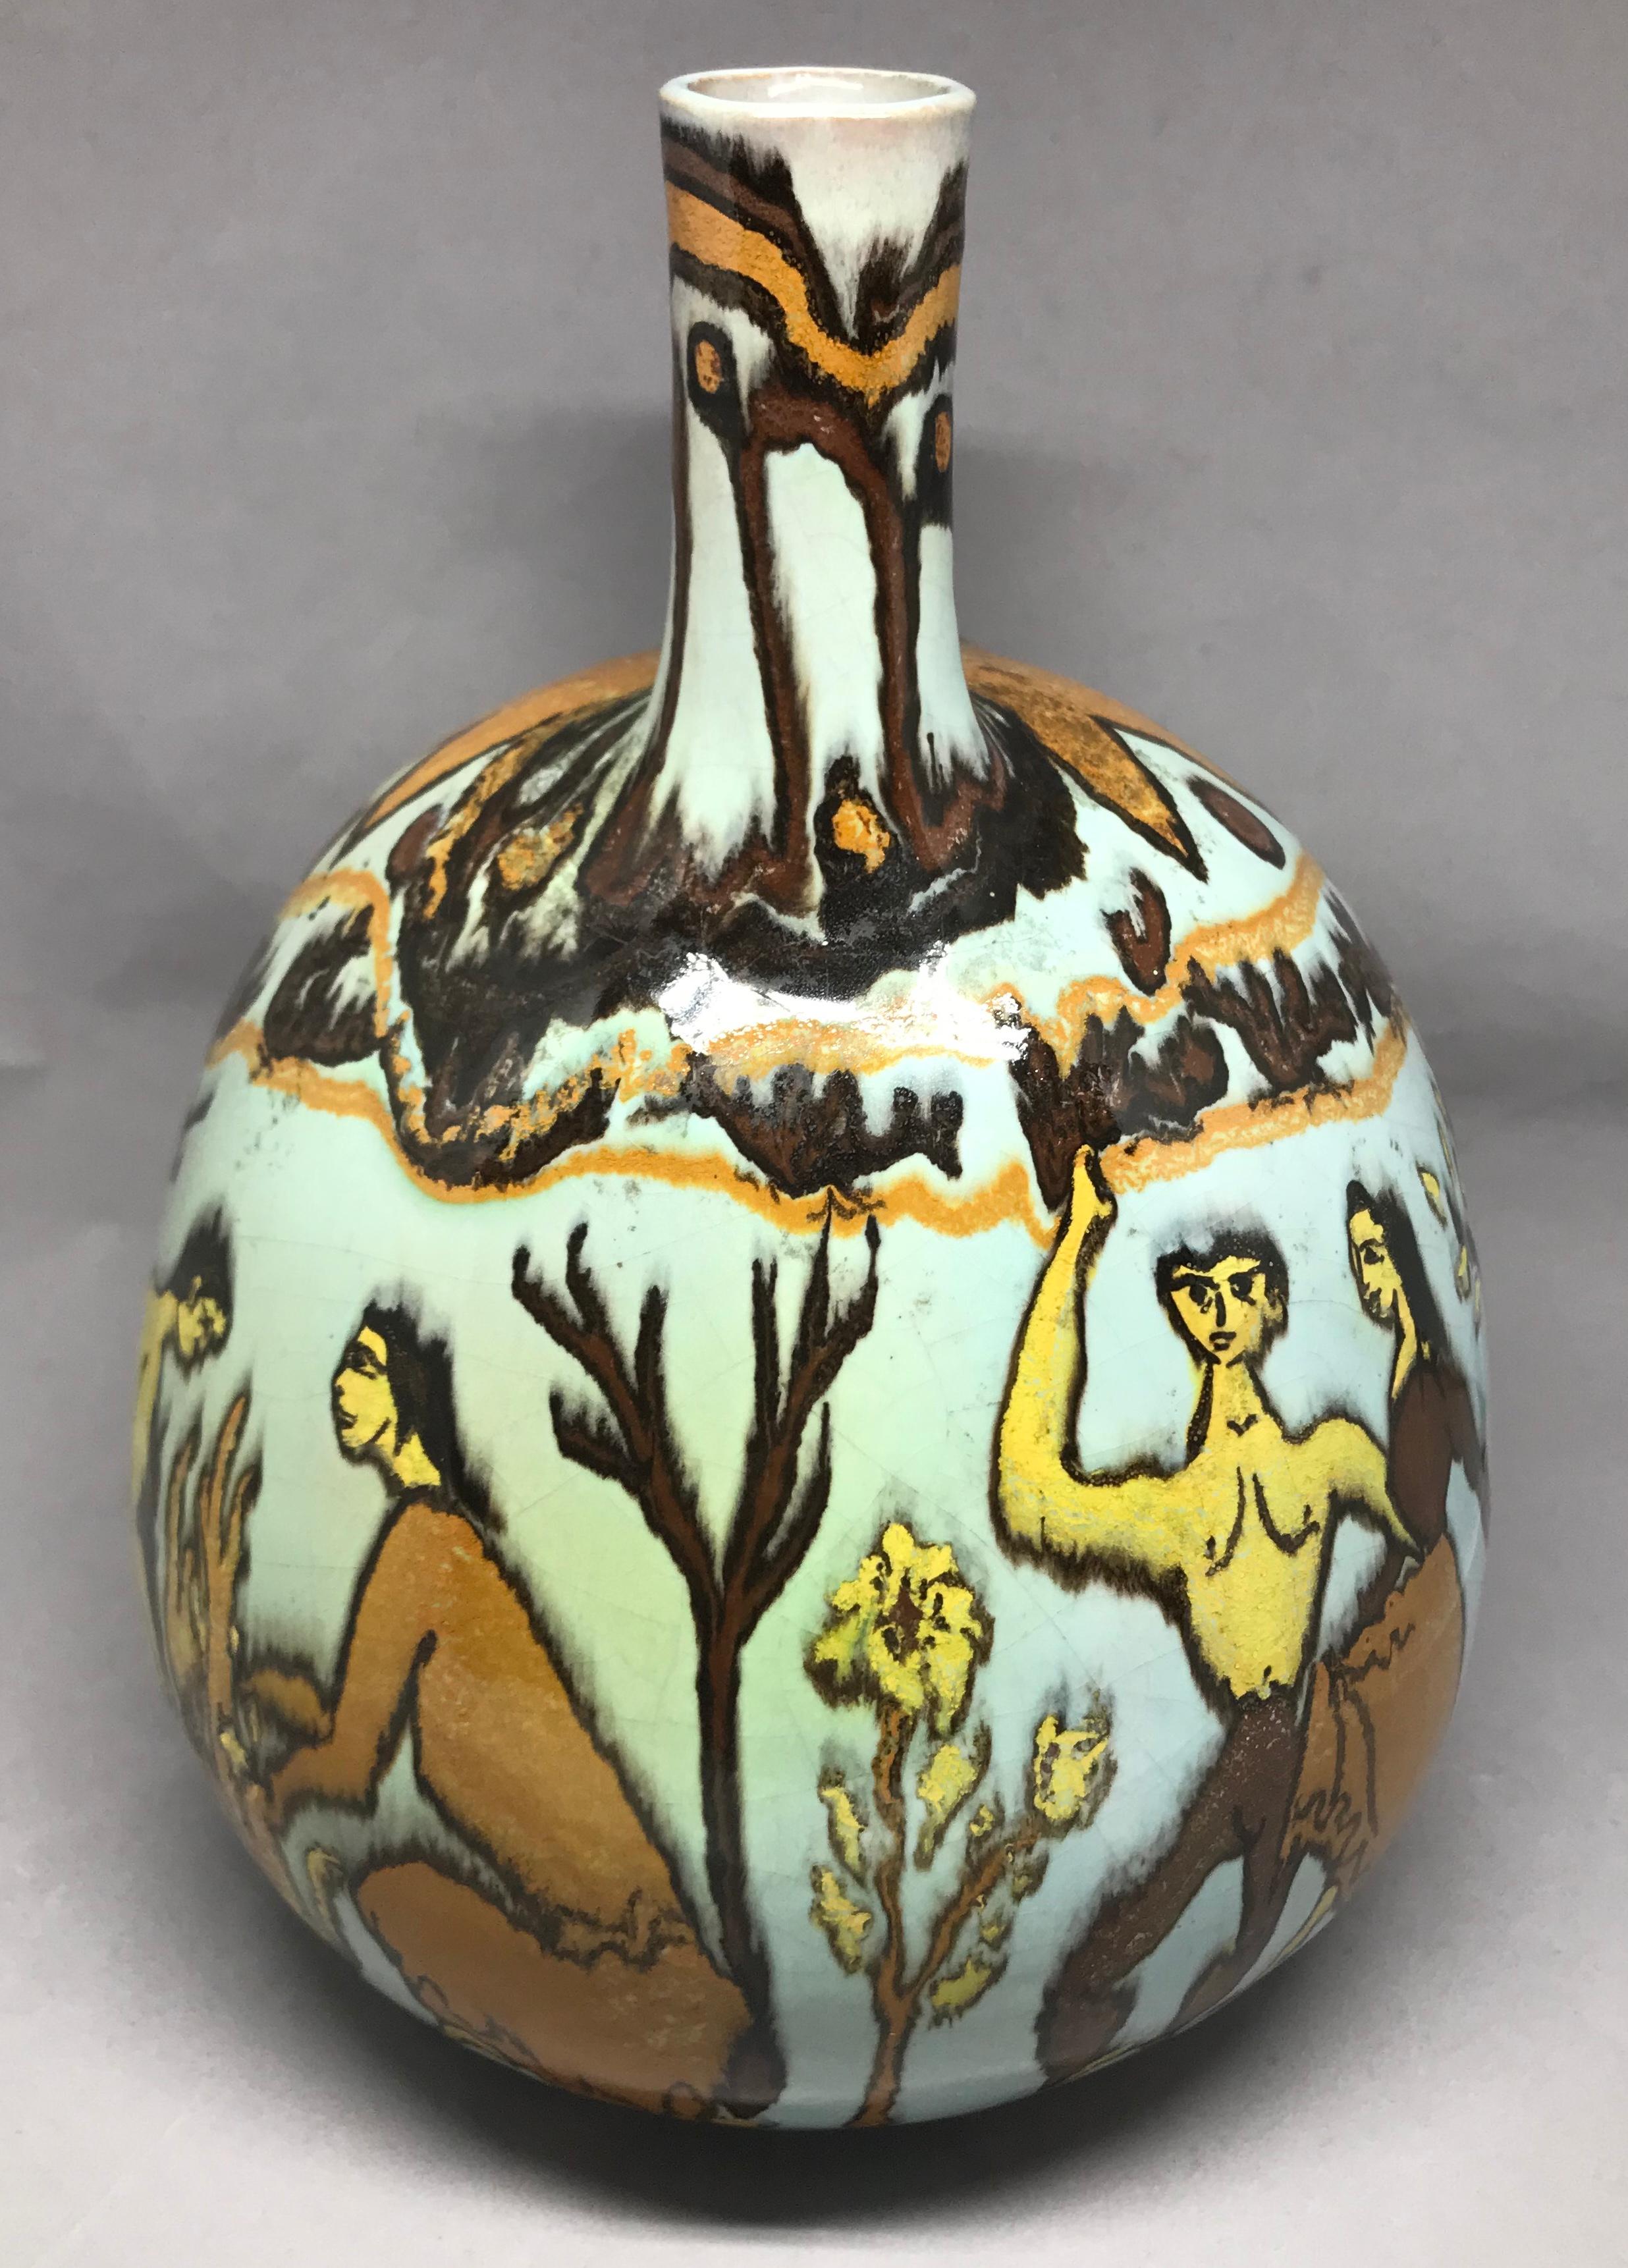 Modernist Etruscan style vase. Richly coloured glazed ceramic vase in the Etruscan style decorated with a Picasso-esque allegorical motif of the Four Seasons. signed V Lucchi. Italy, 1950. 
Dimensions: 9.5